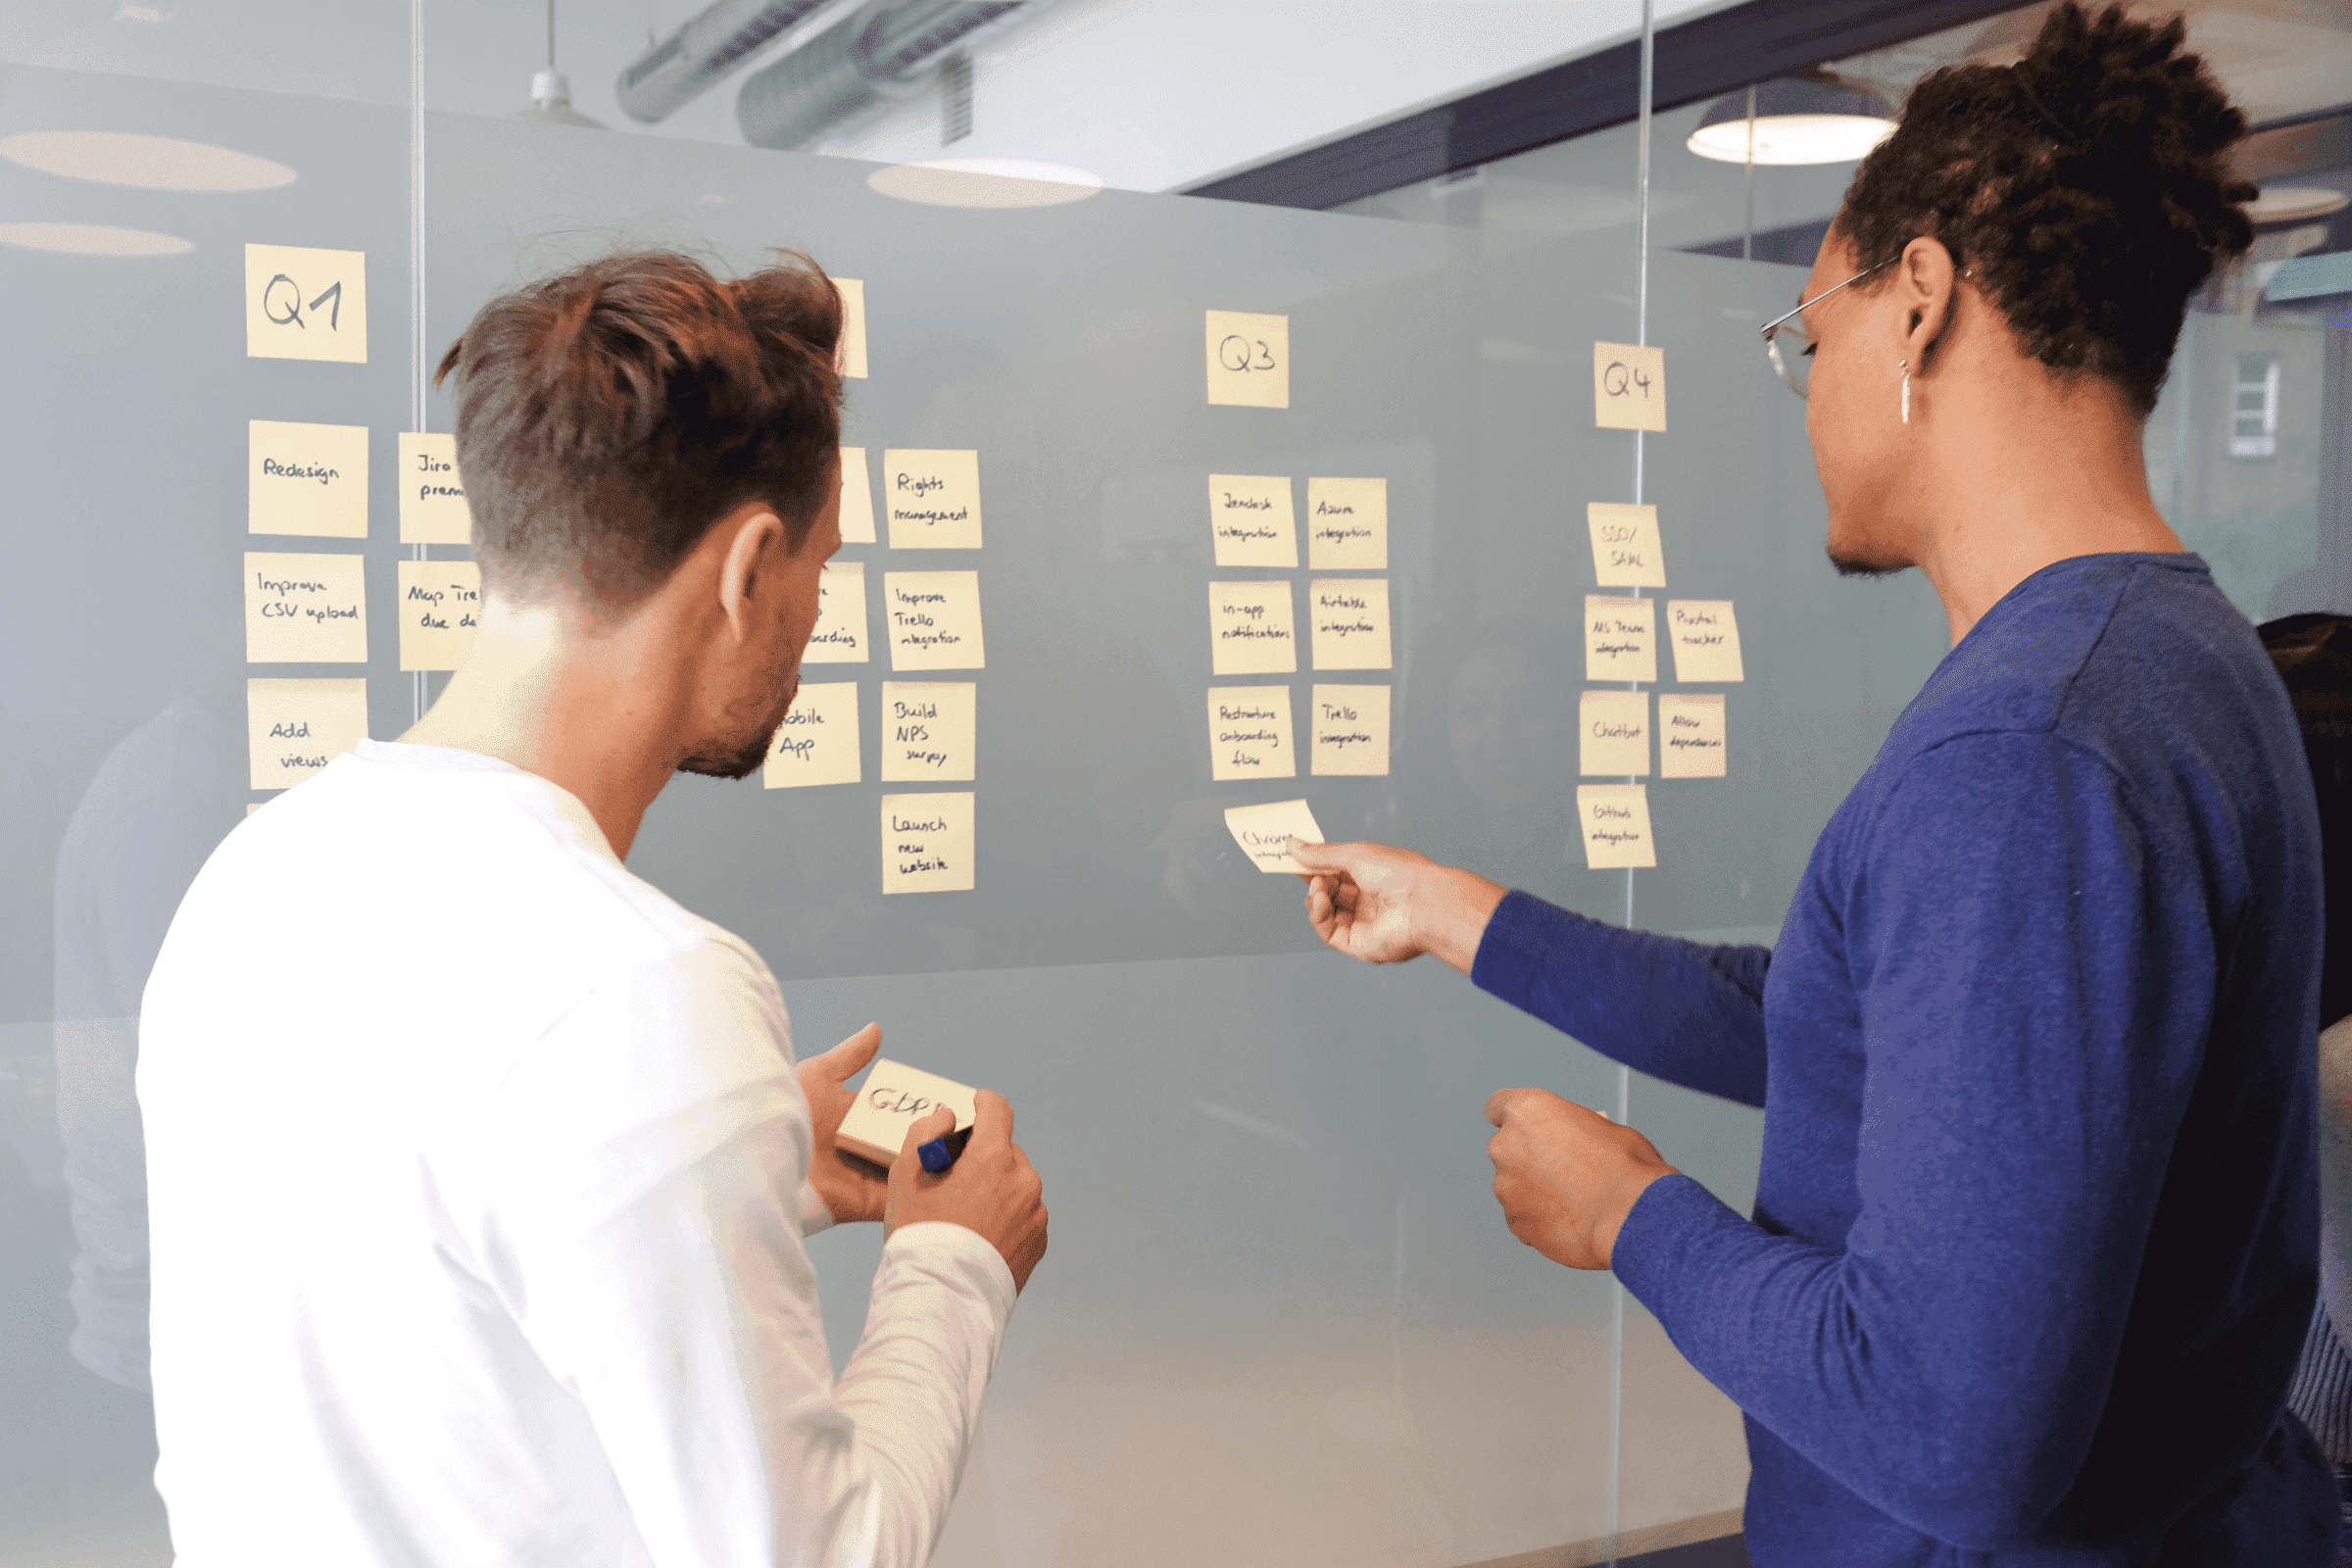 Two people put post-it notes on a wall while discussing ideas.